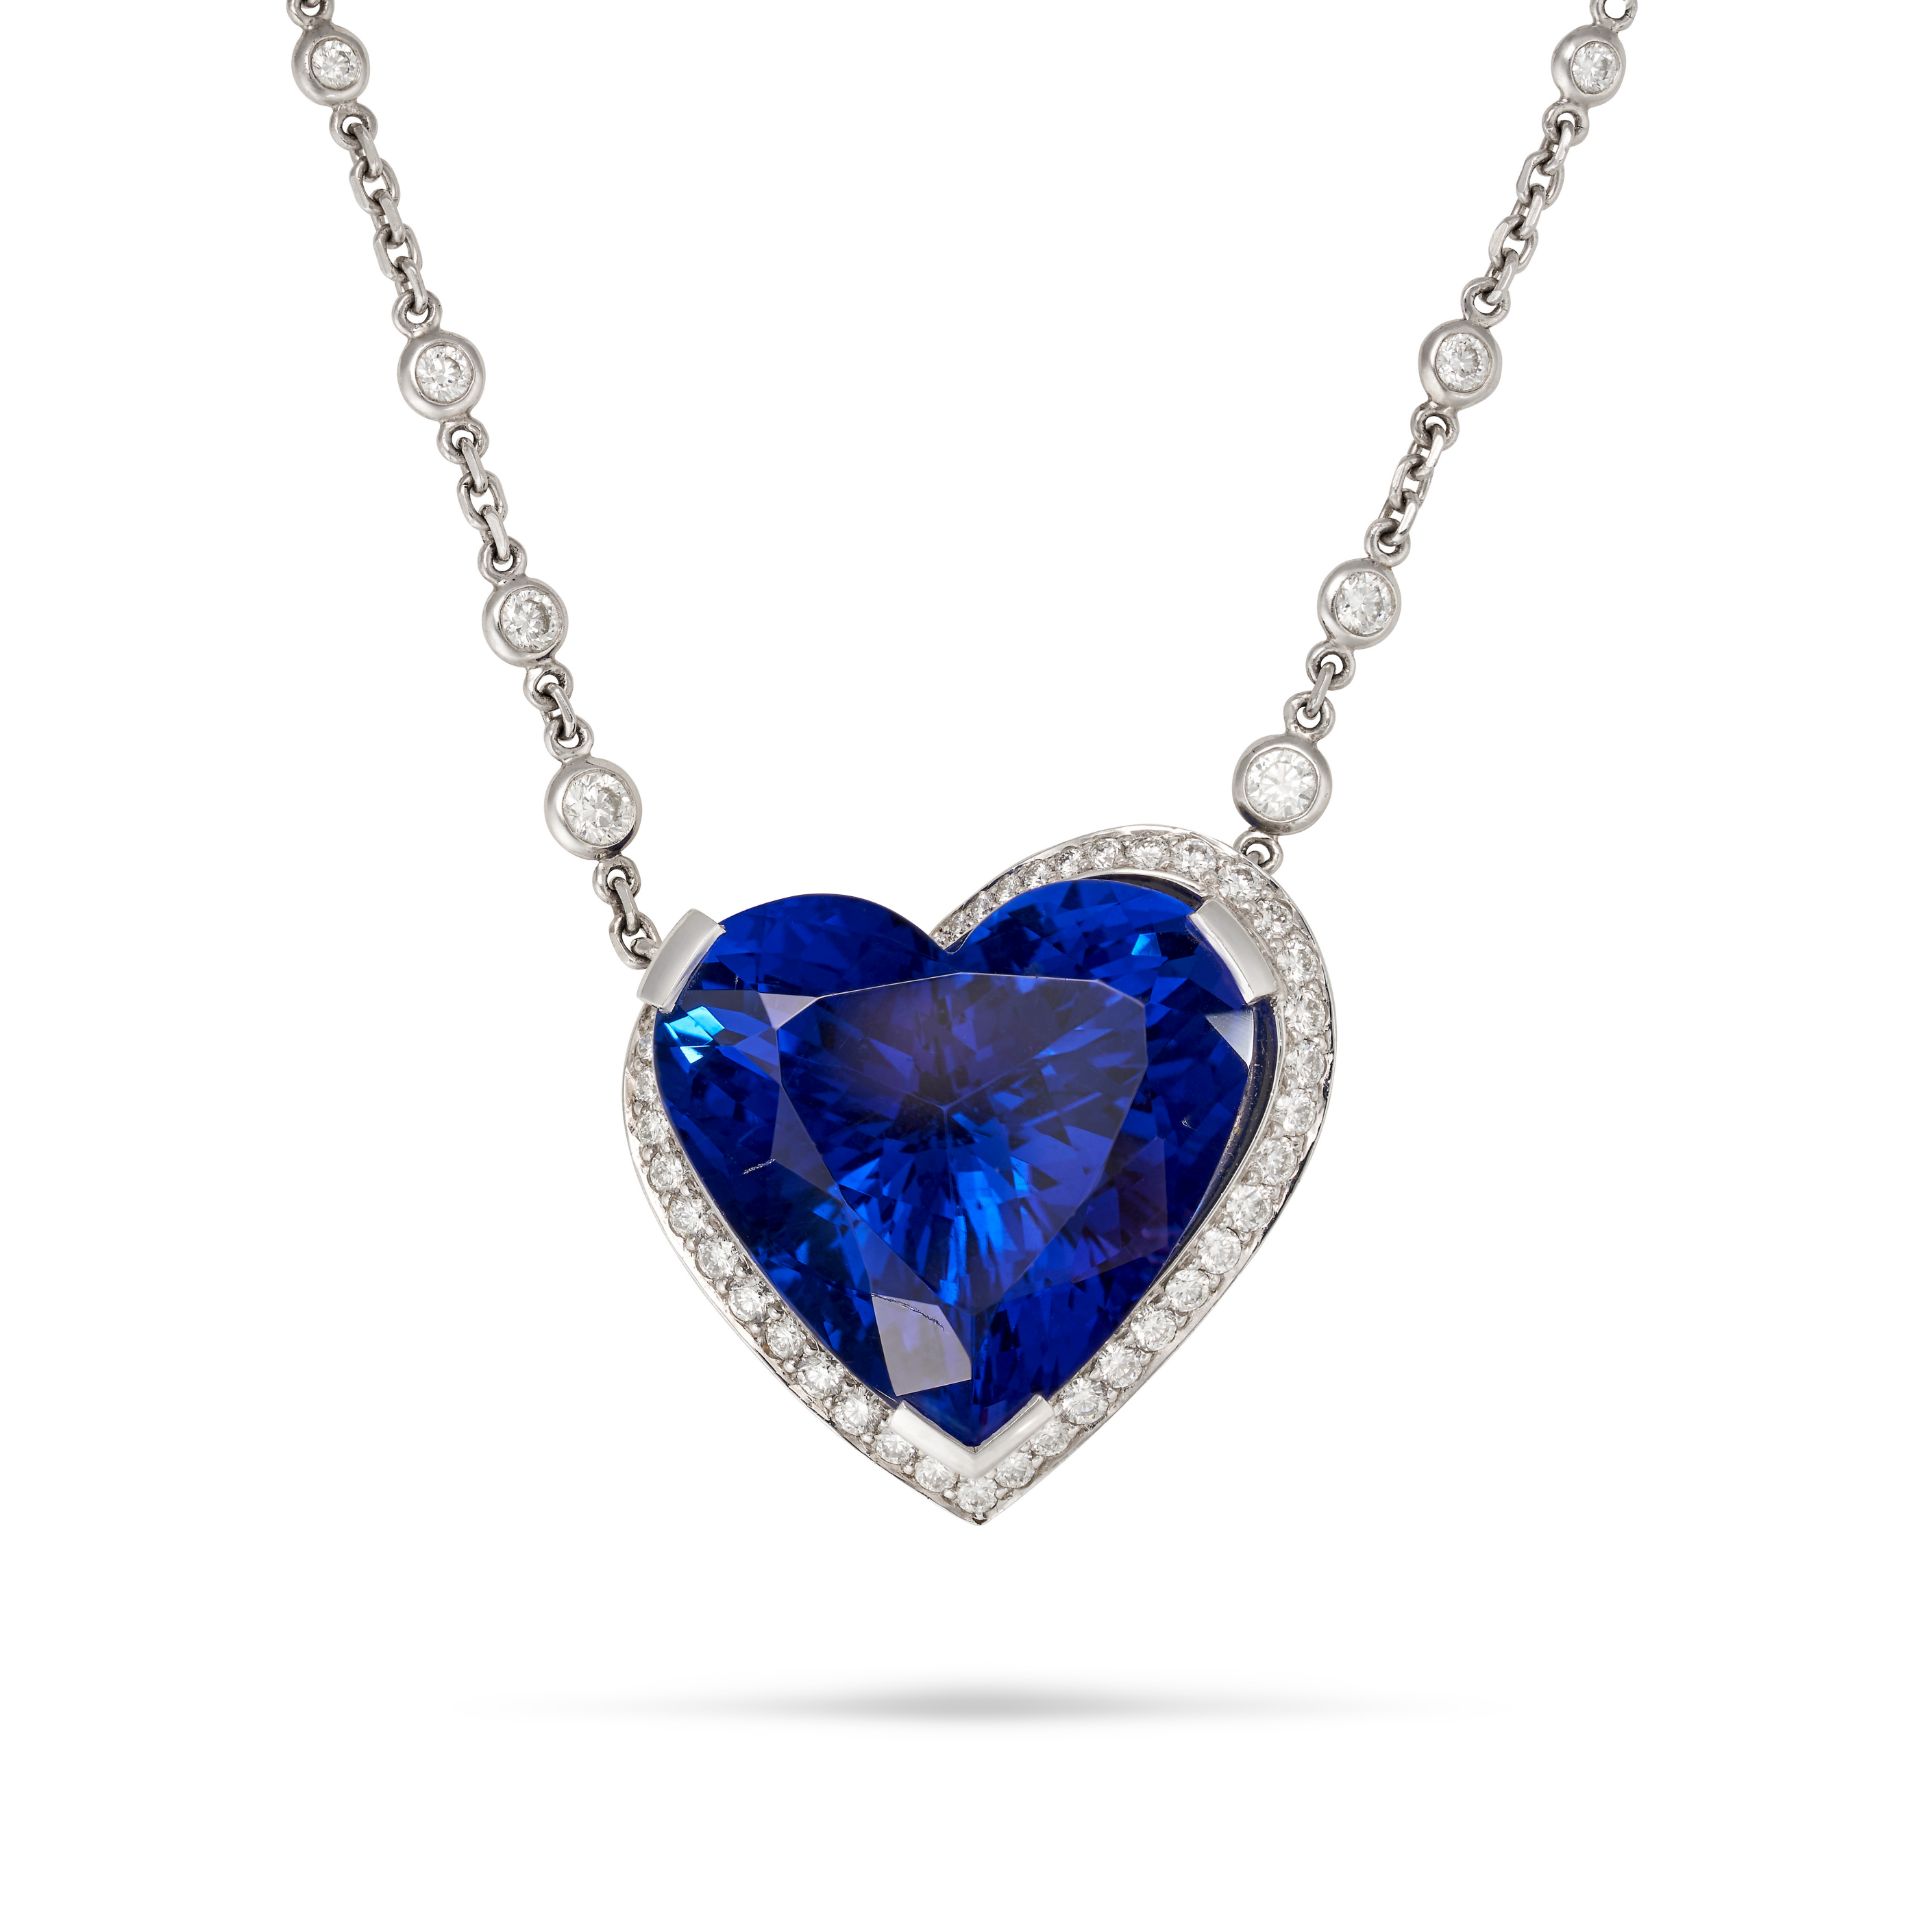 BOODLES, A TANZANITE AND DIAMOND PENDANT NECKLACE in platinum, set with a heart shaped tanzanite ...